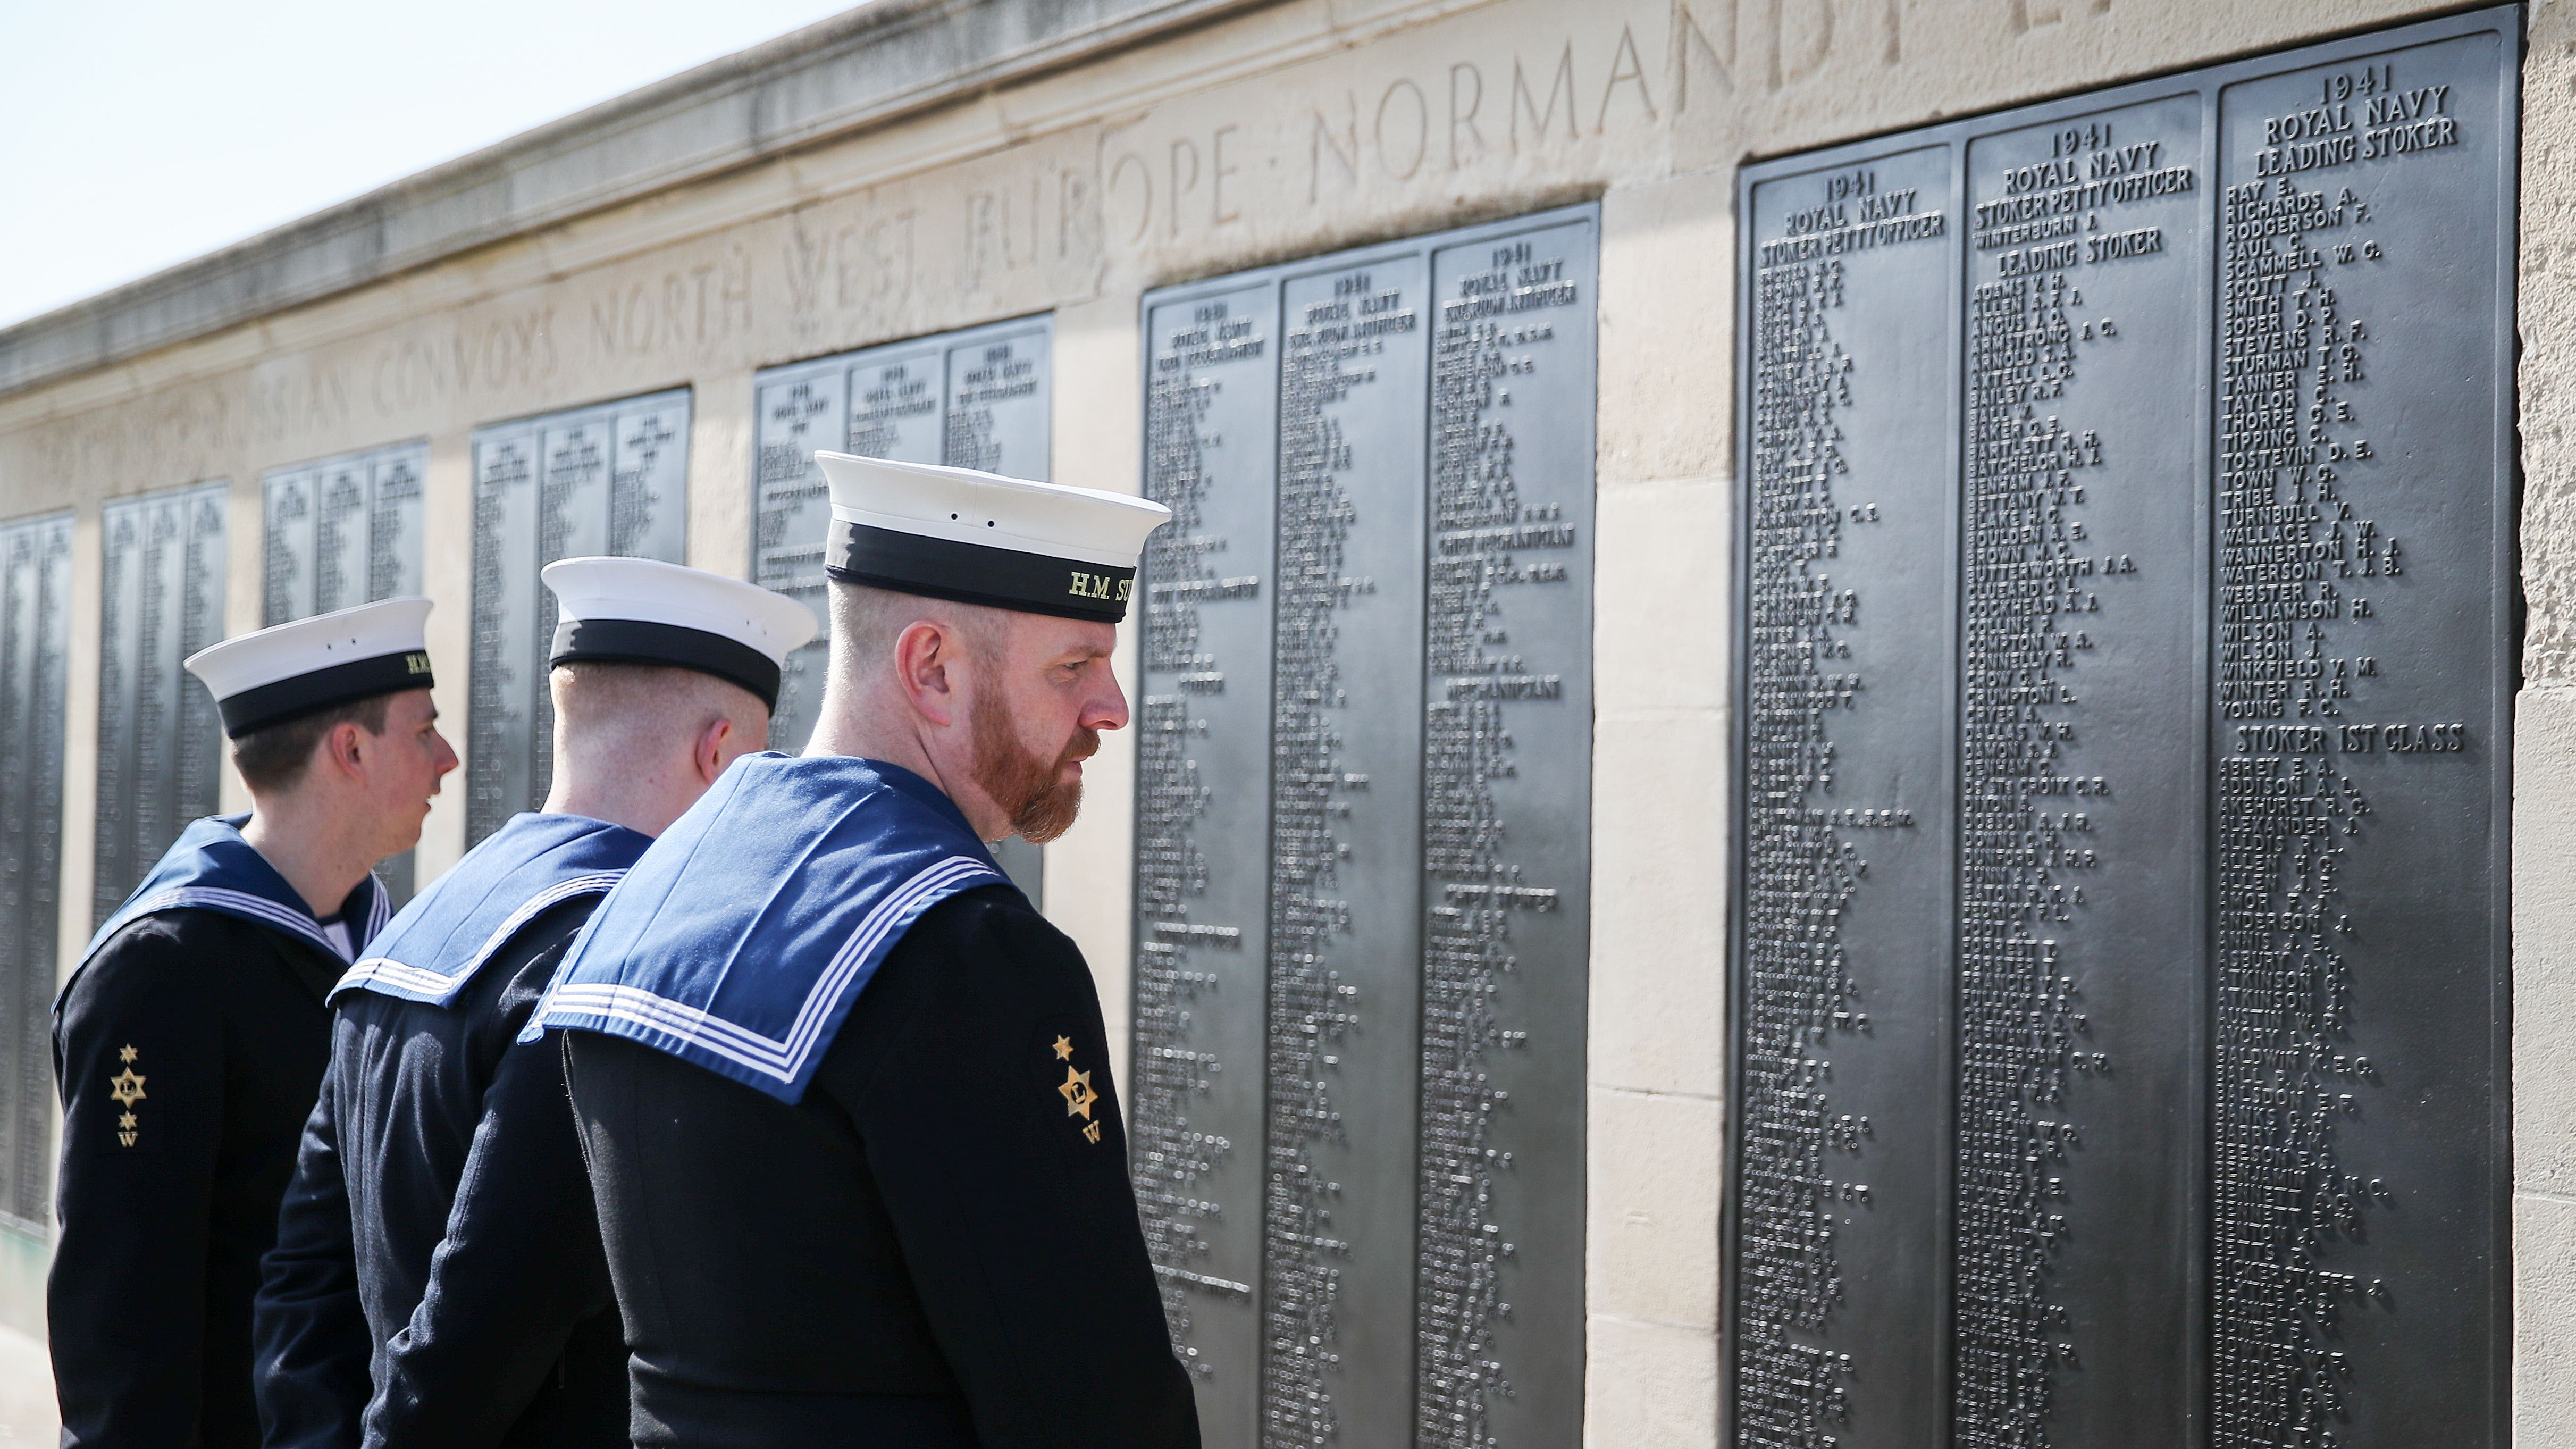 Portsmouth chosen to mark D-Day because of its key role in preparing invasion